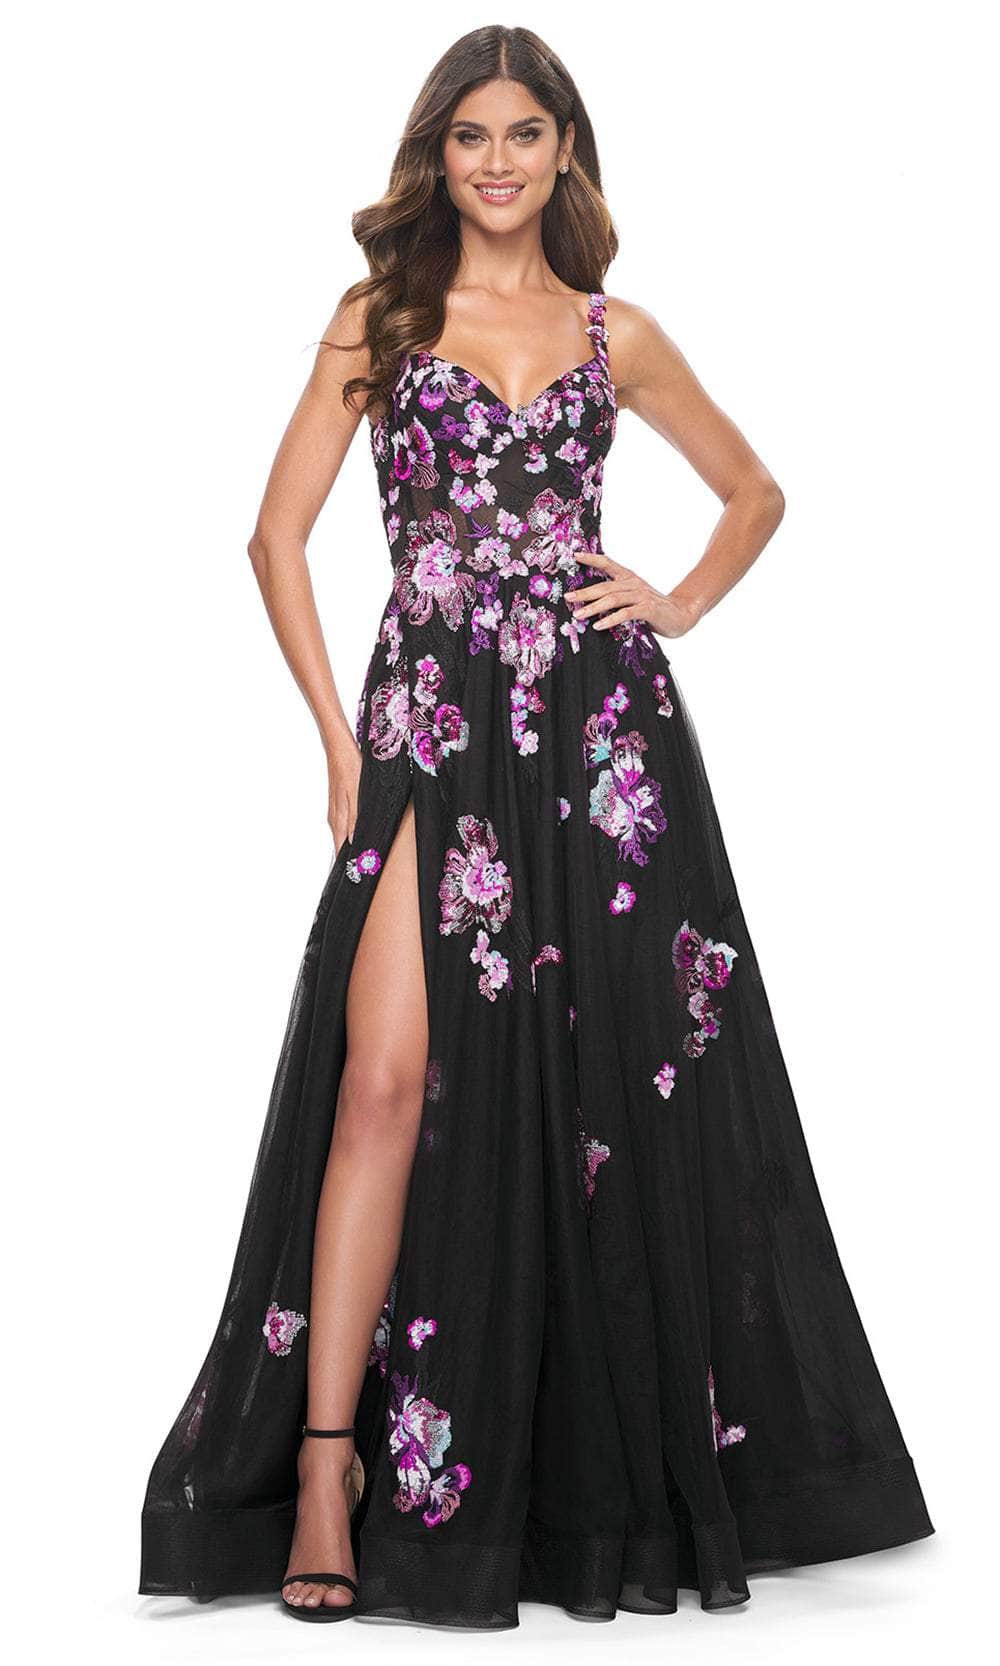 Image of La Femme 32030 - Sequin Floral Embroidered A-Line Prom Gown